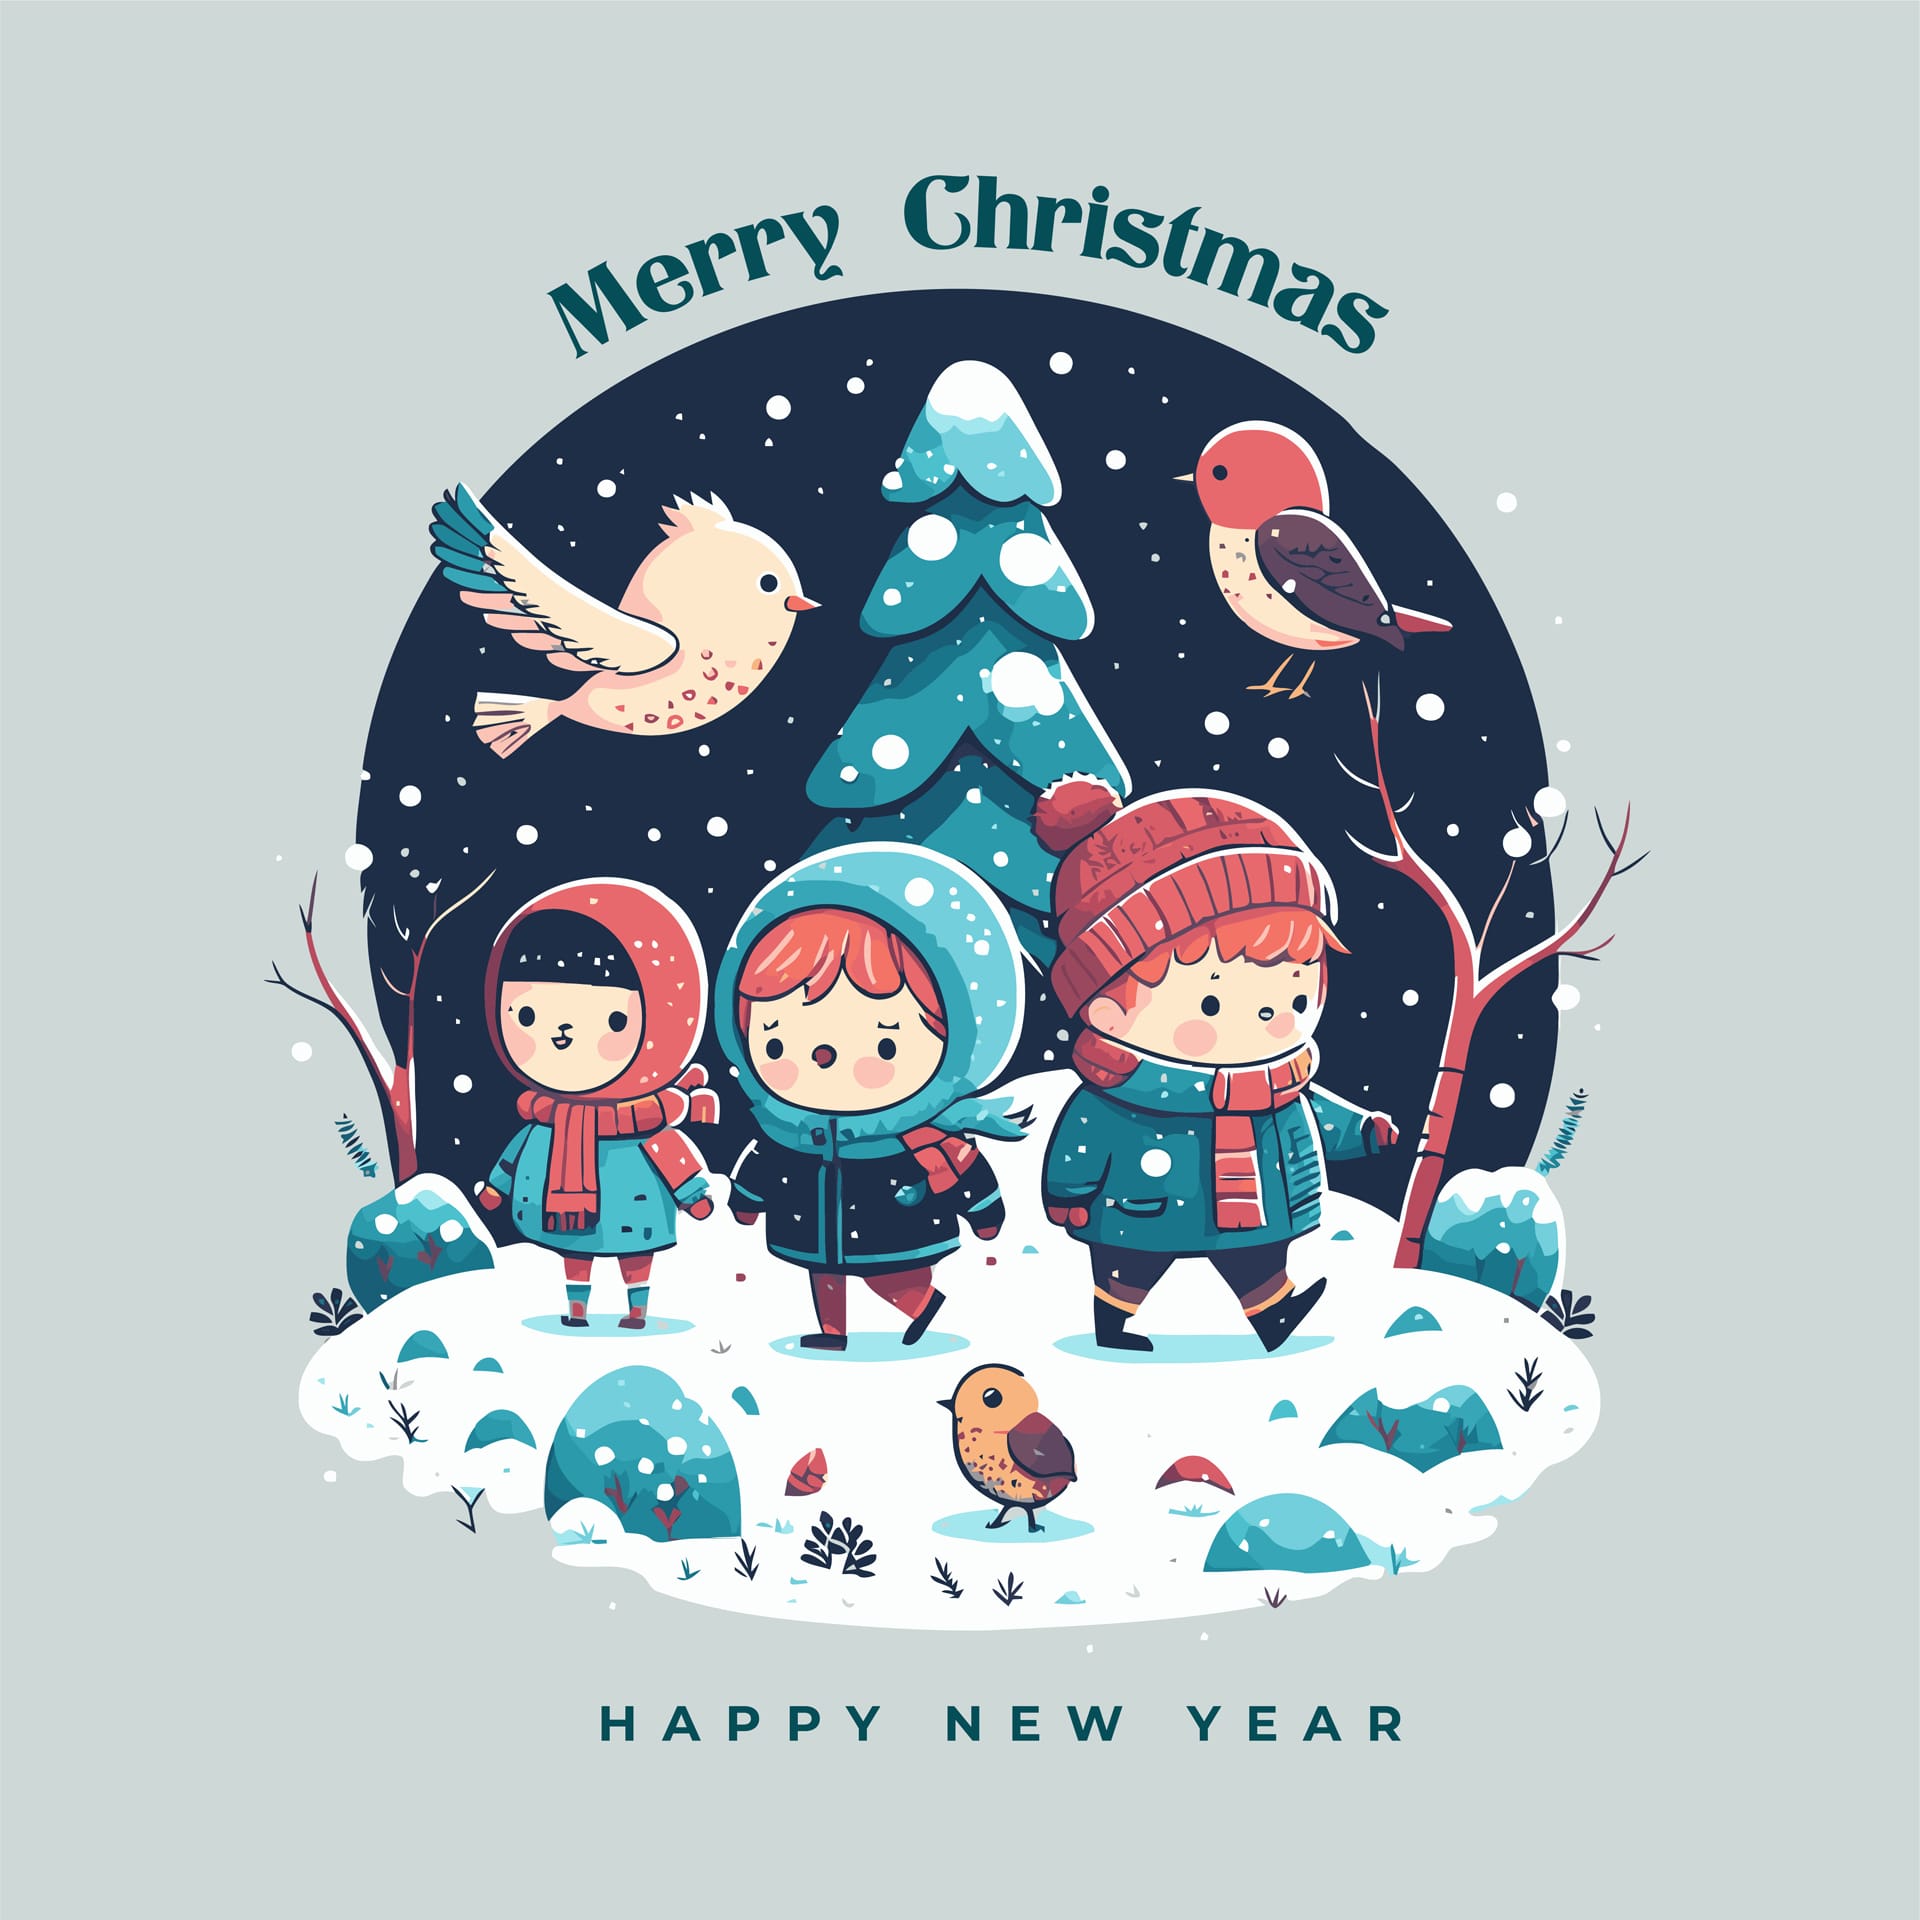 Christmas happy new year greetings card invitation banner flat image